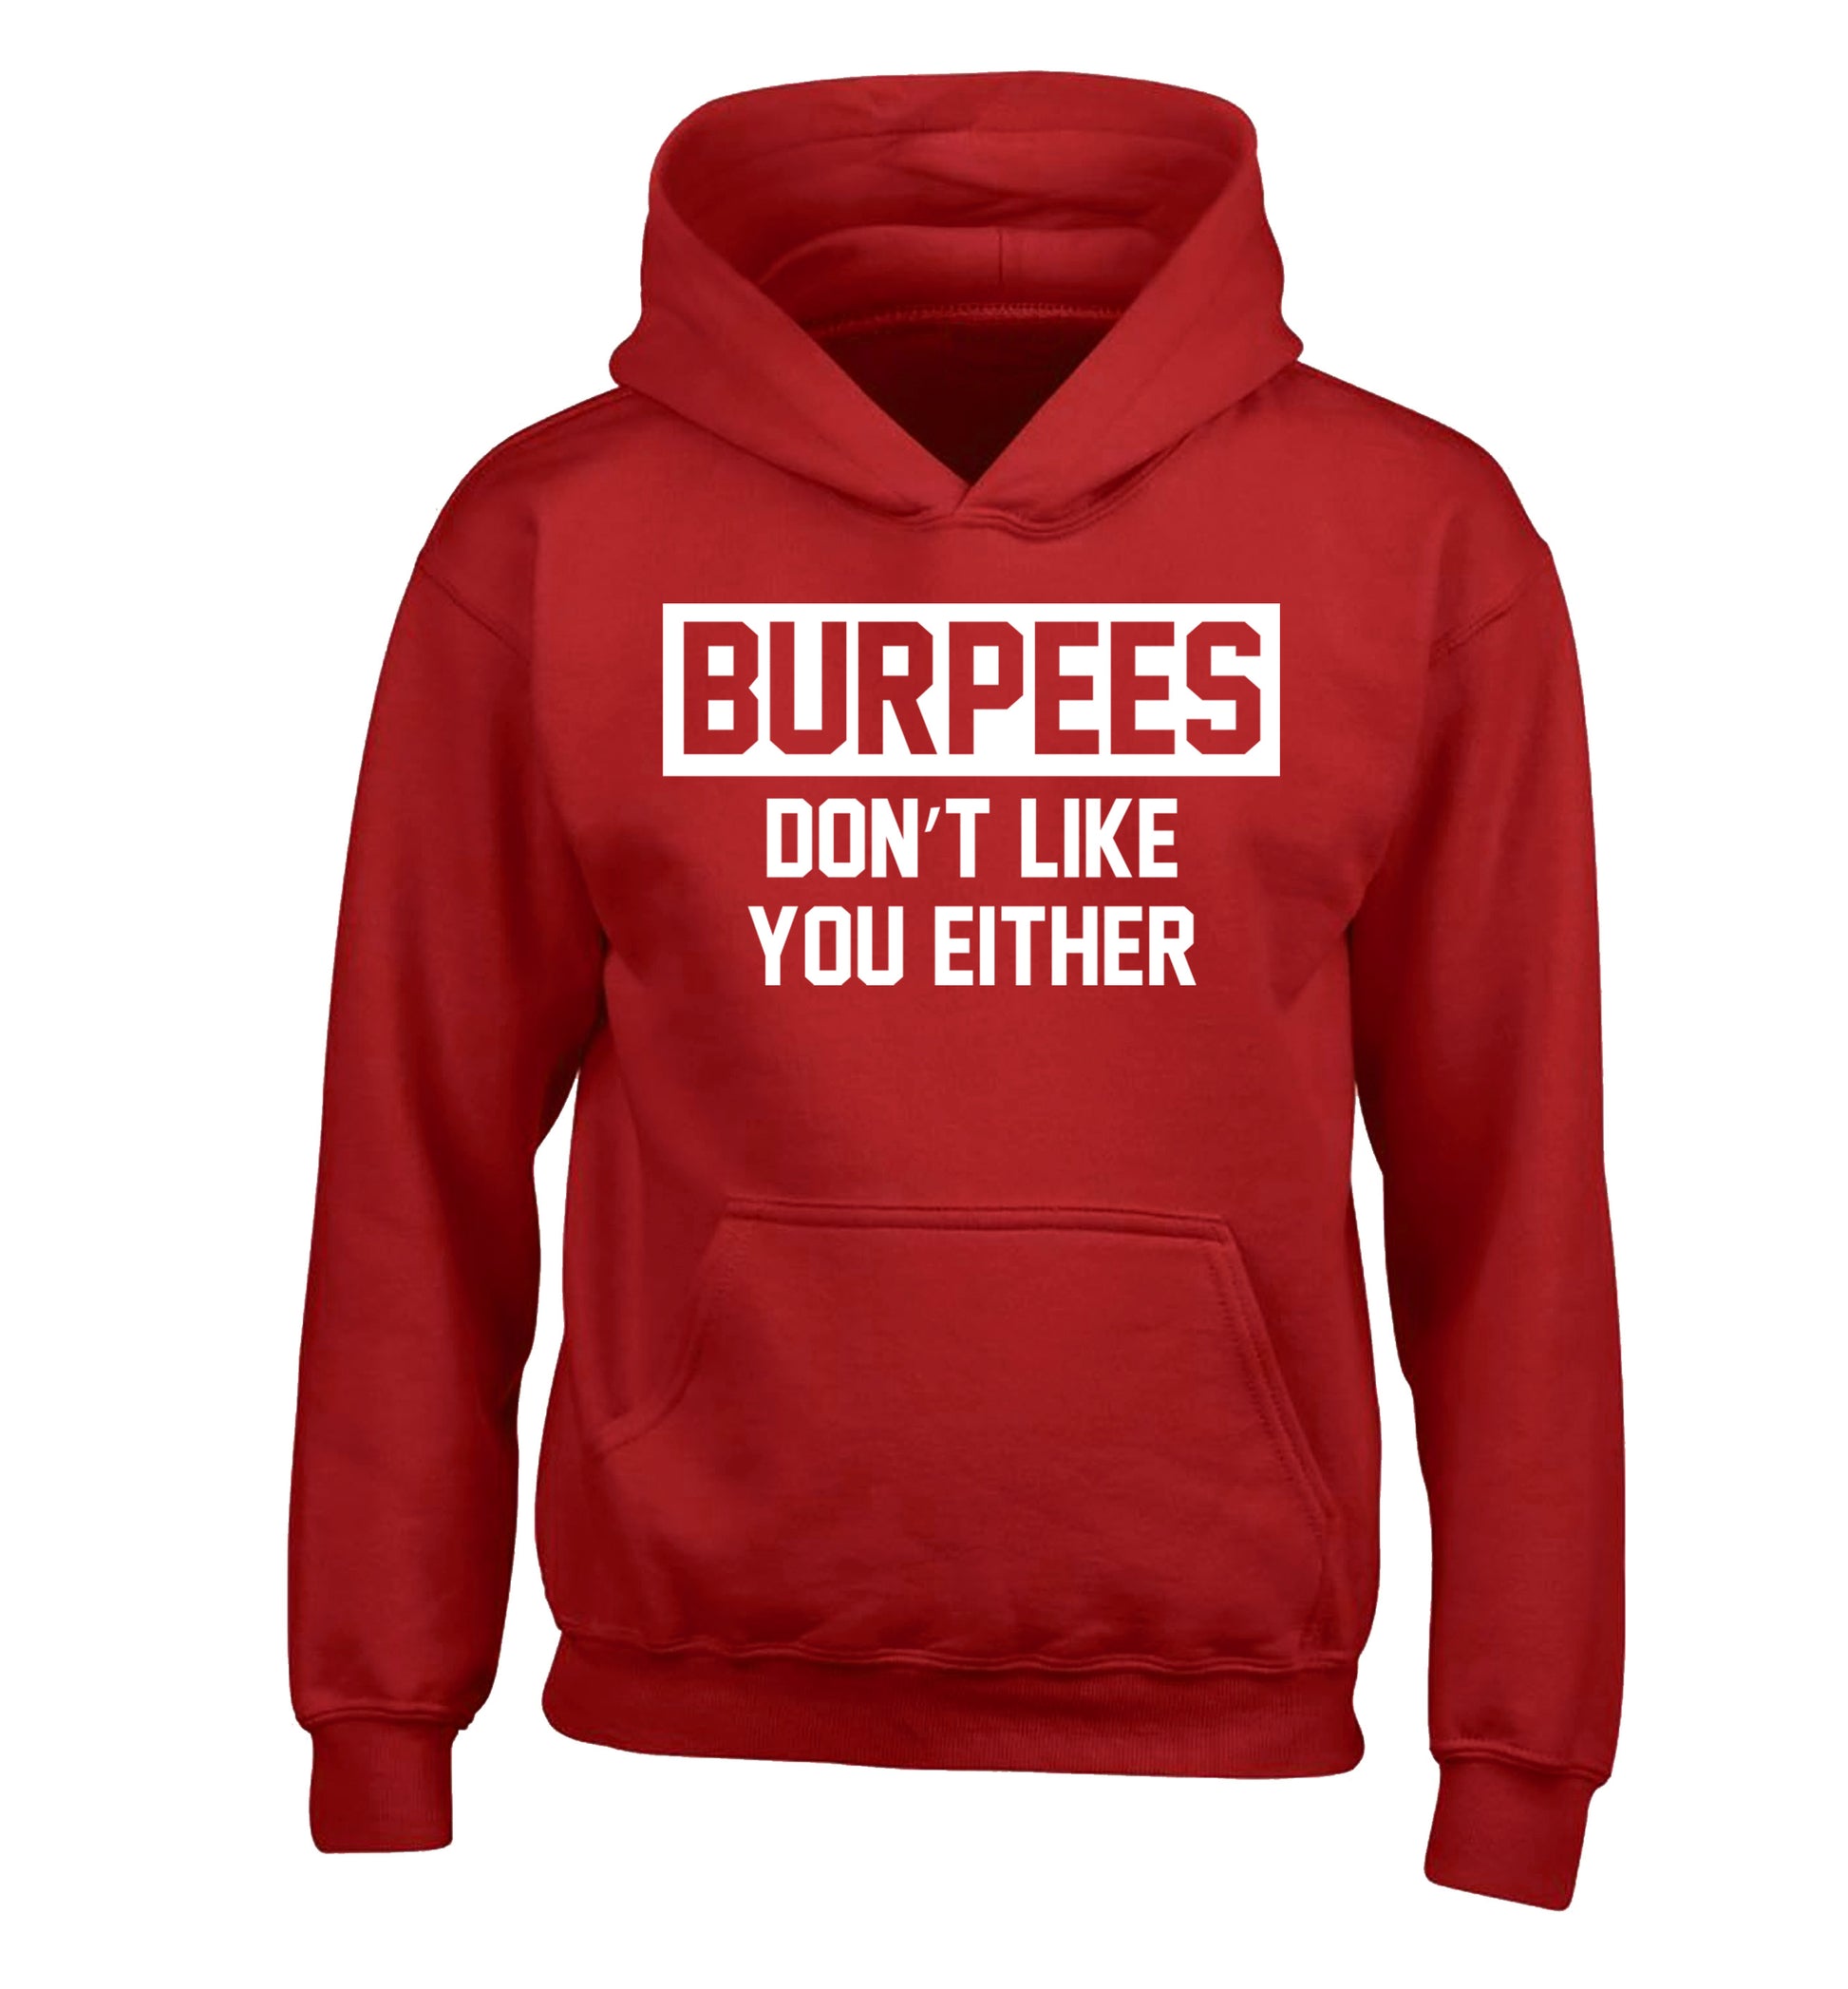 Burpees don't like you either children's red hoodie 12-14 Years